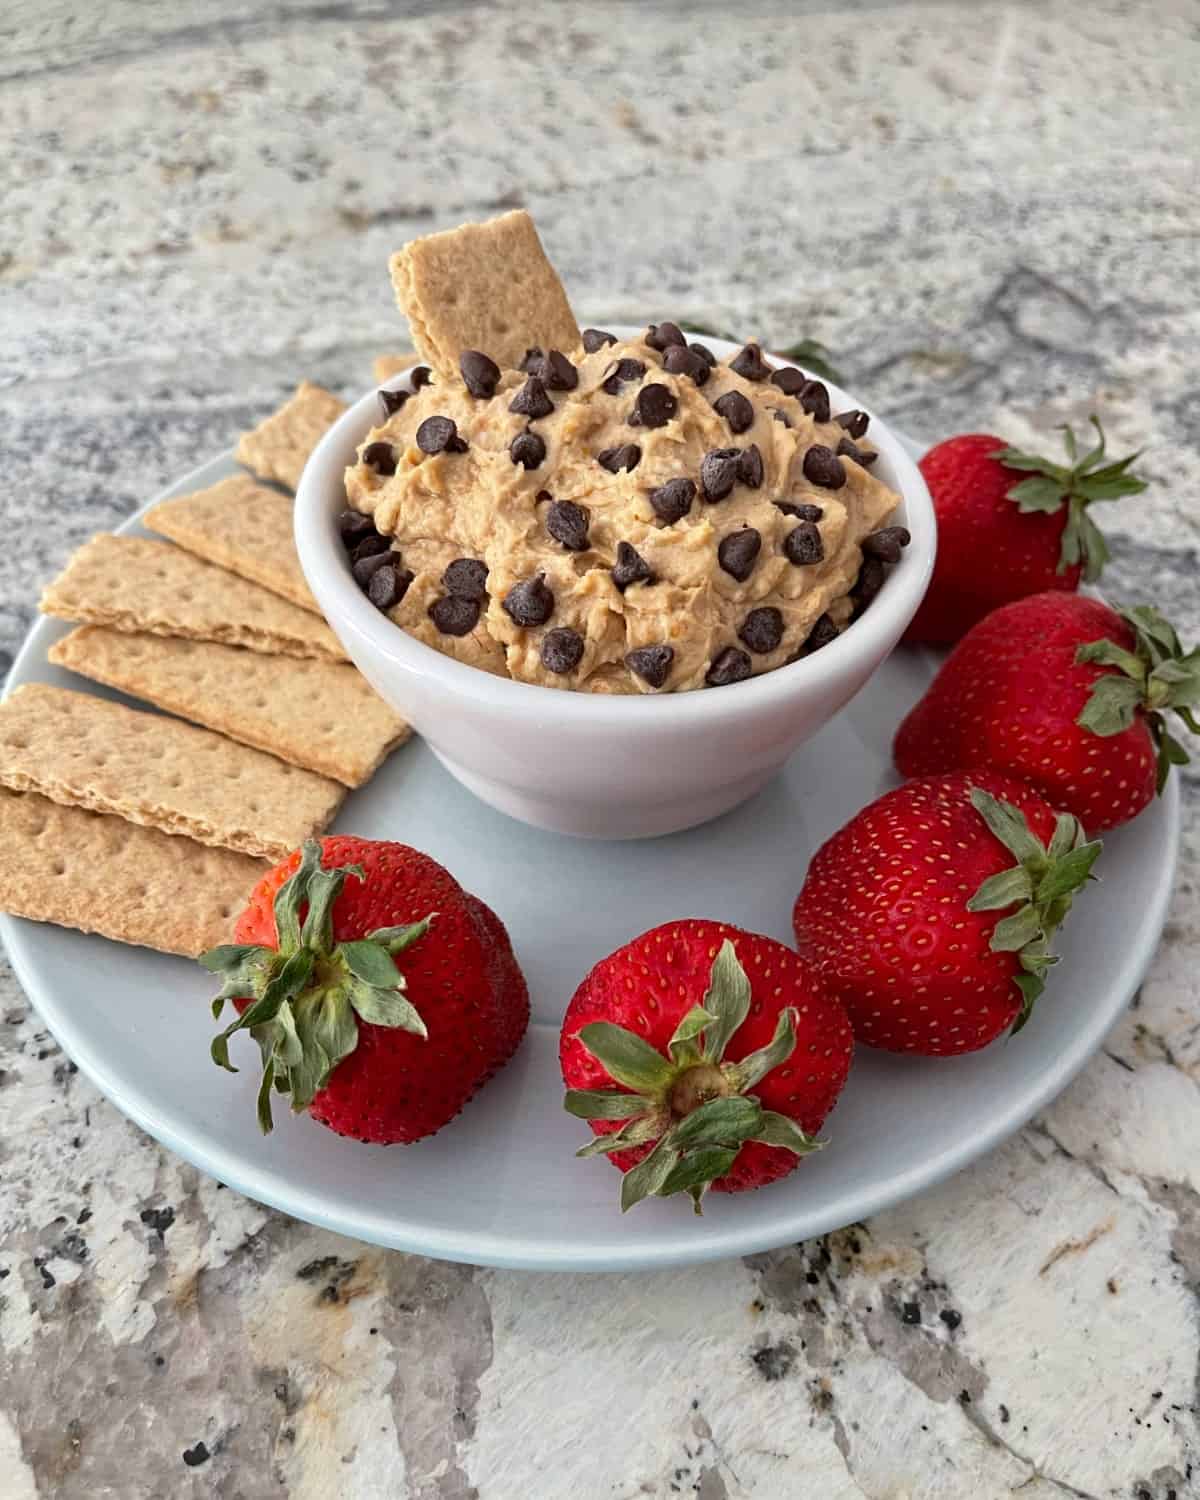 Peanut butter cup dip with graham crackers and strawberries.